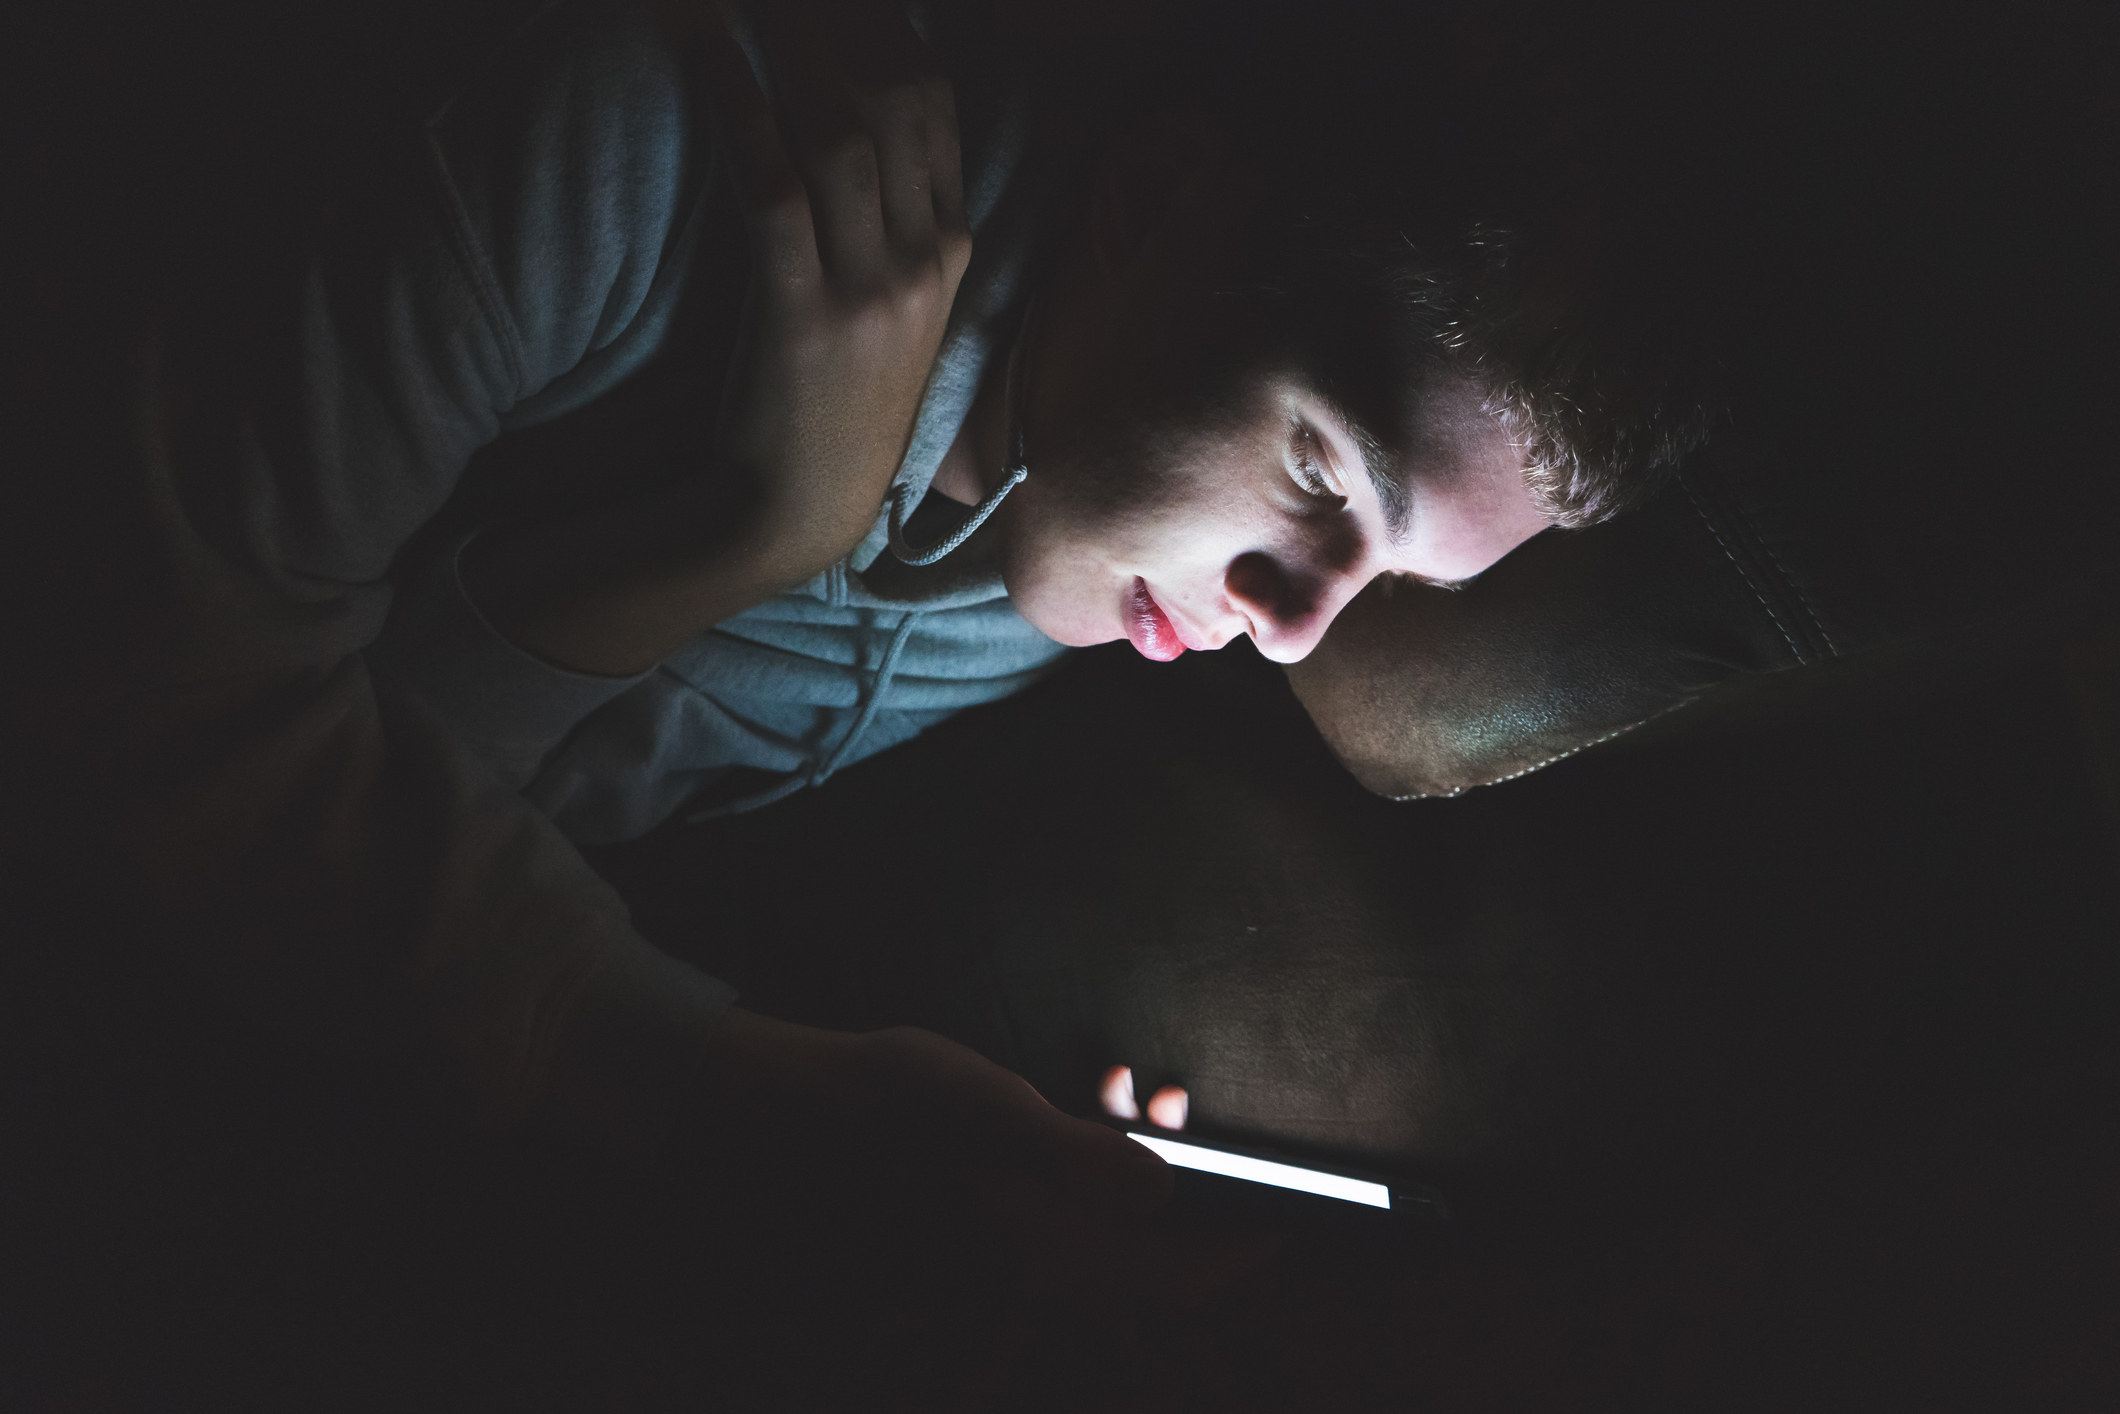 The image displays a teenager lying down on a couch in the dark. The light from the screen of his smartphone is illuminating his face.